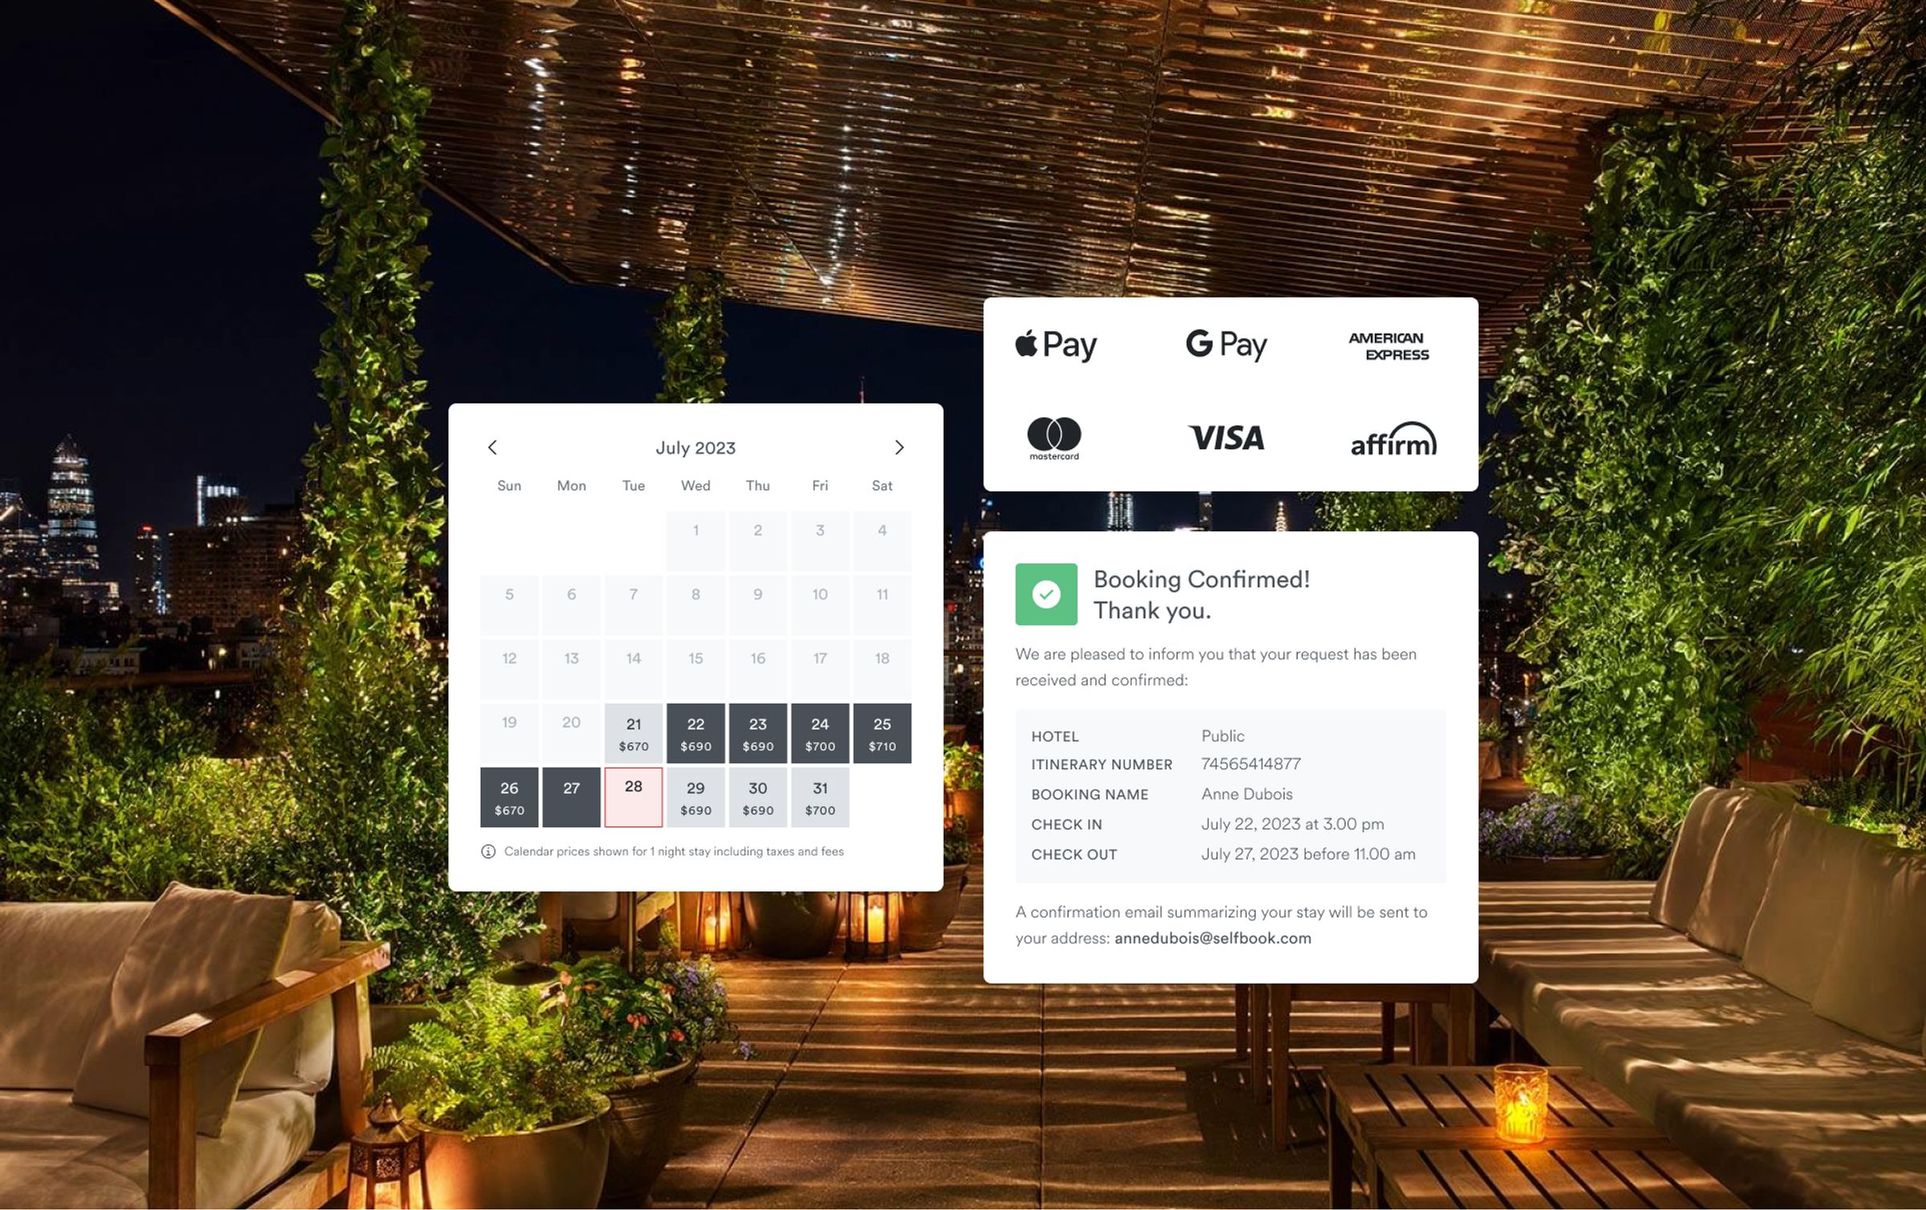 Mobile Commerce Meets Direct Hotel Bookings